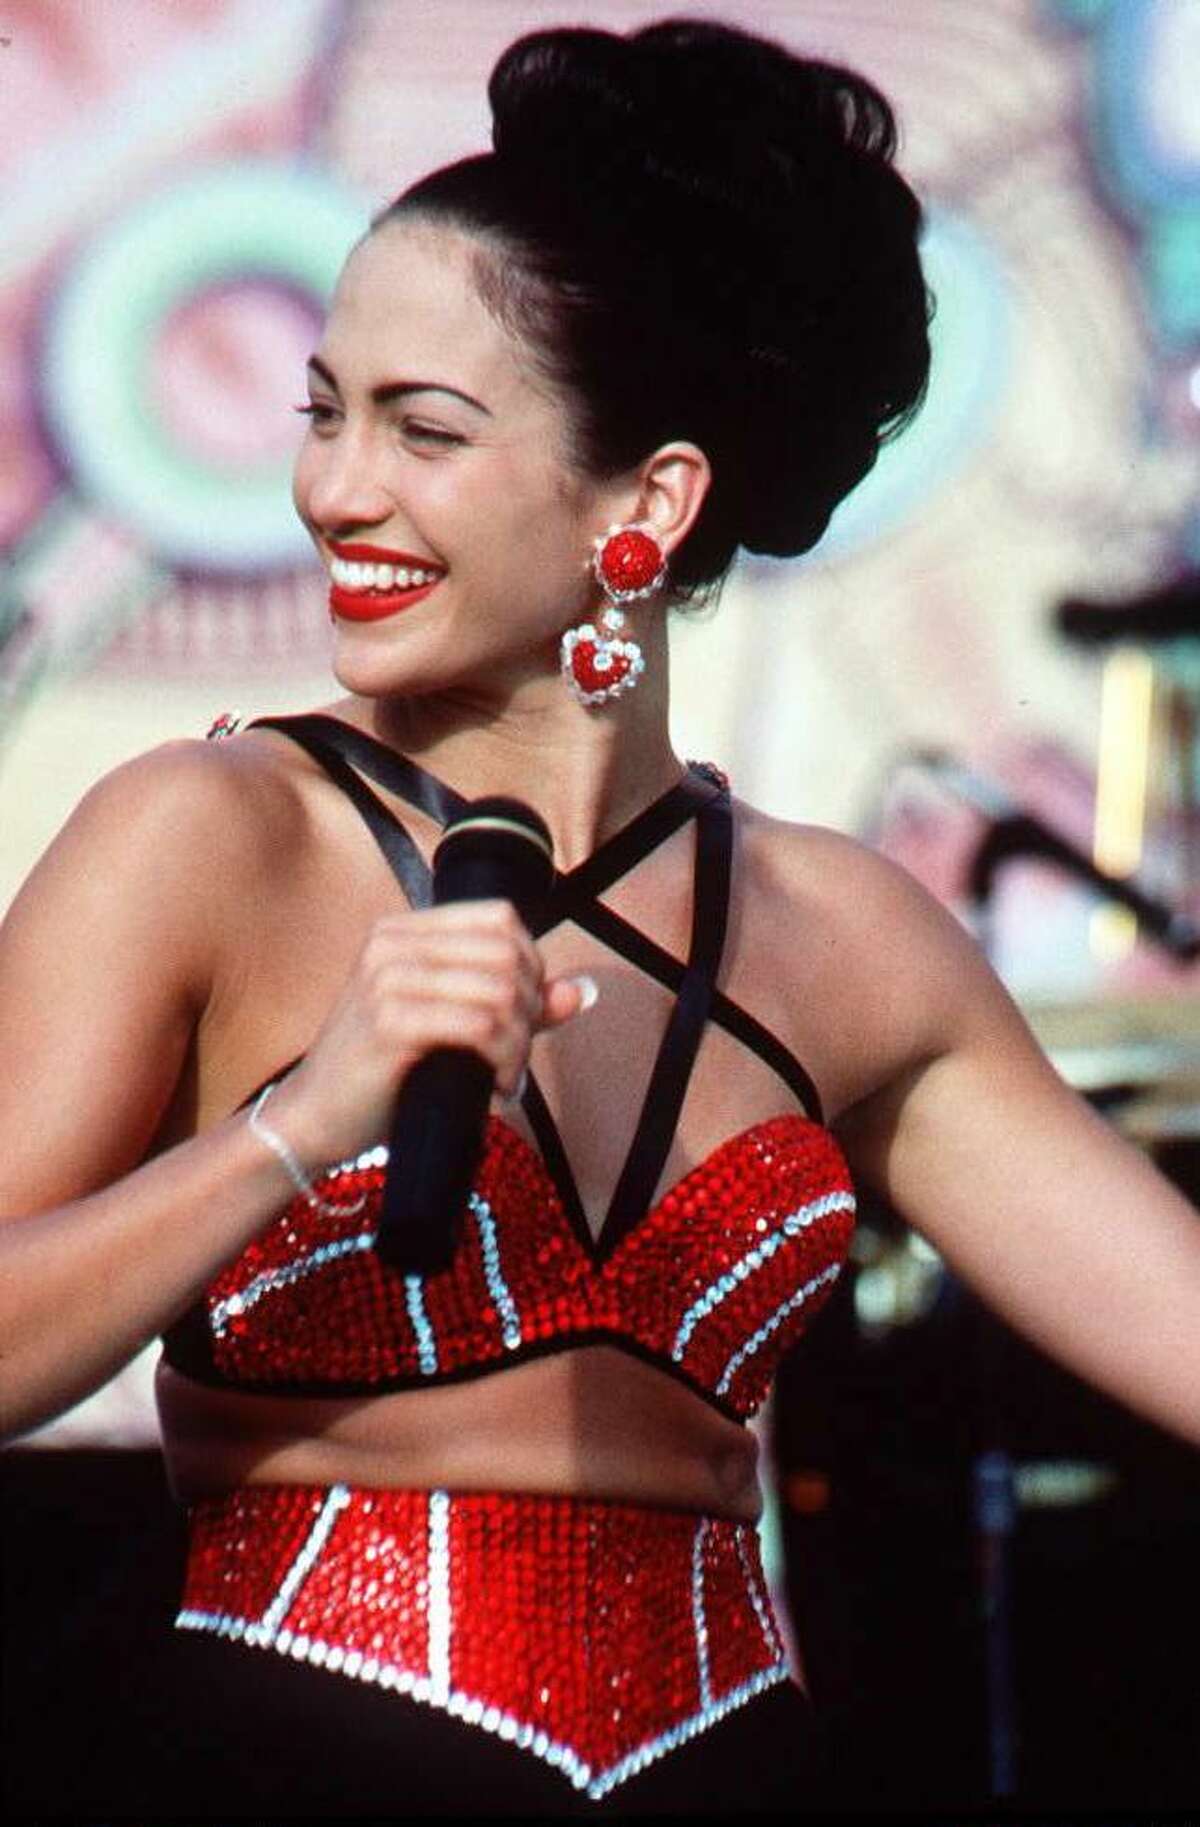 Actress Jennifer Lopez, who plays Selena in the movie "Selena," performs in one of the scenes from the movie. "Selena" is about the Tejano singer who is murdered by her fan club president.